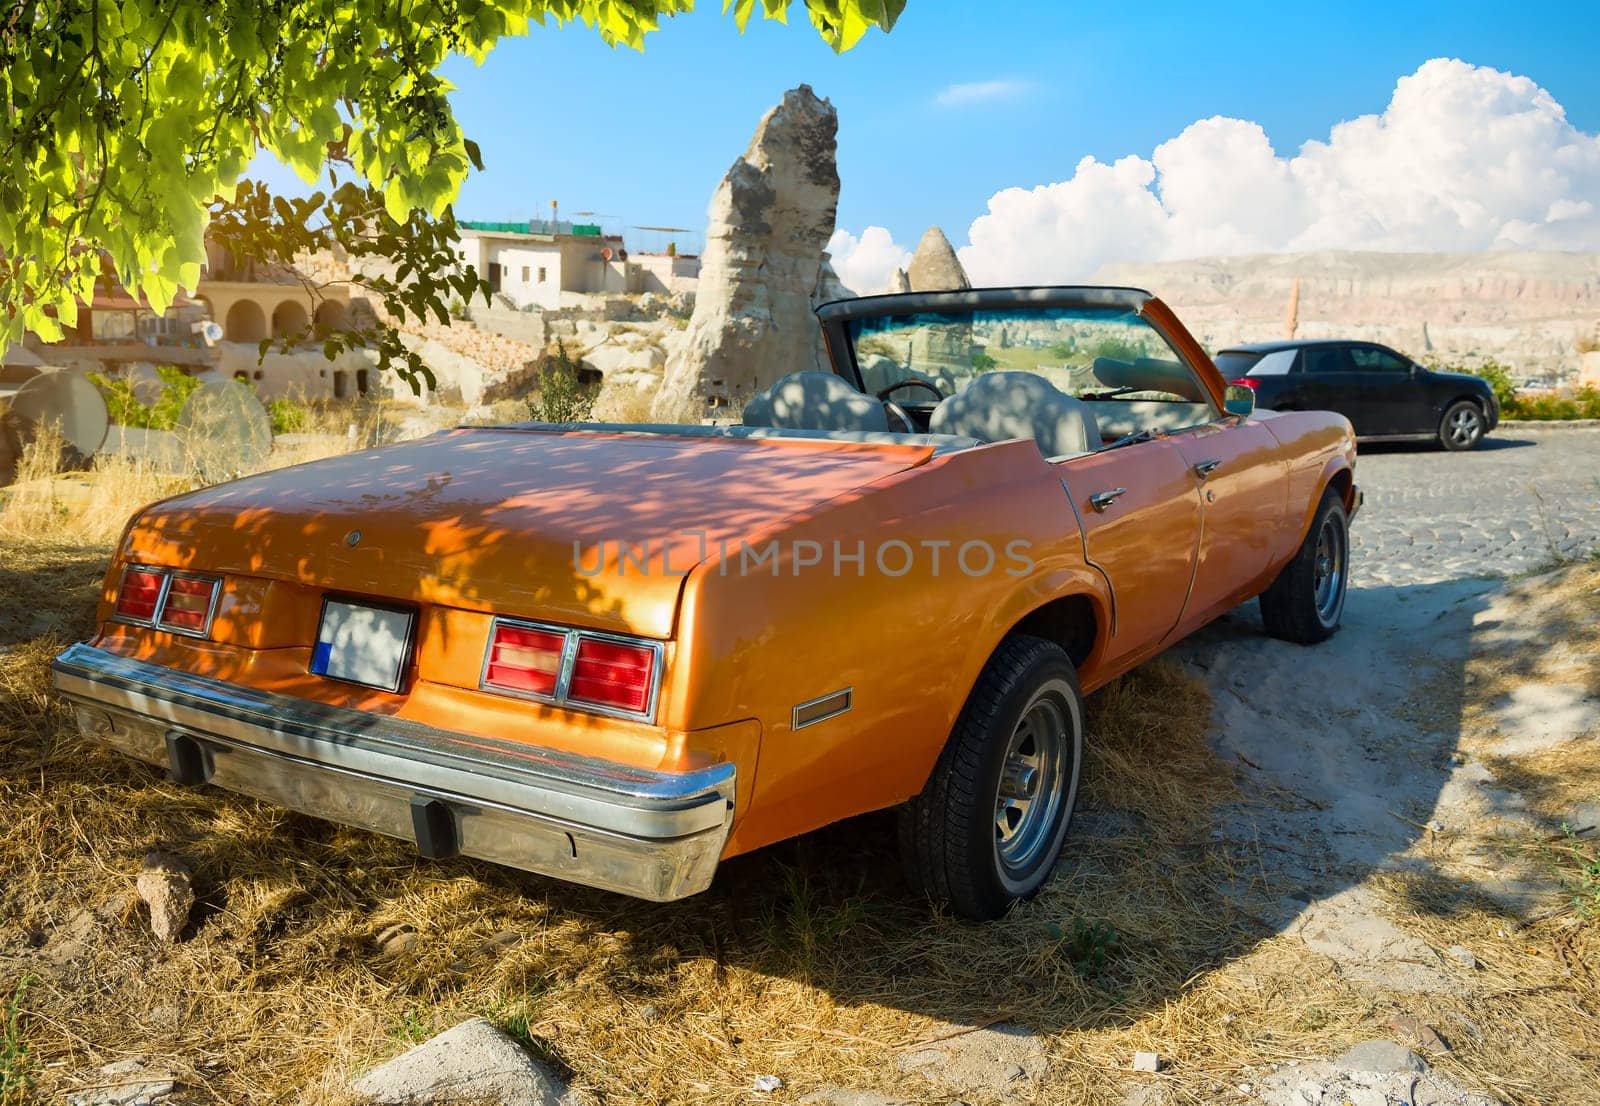 The orange retro car stands alone against the backdrop of a valley of hills